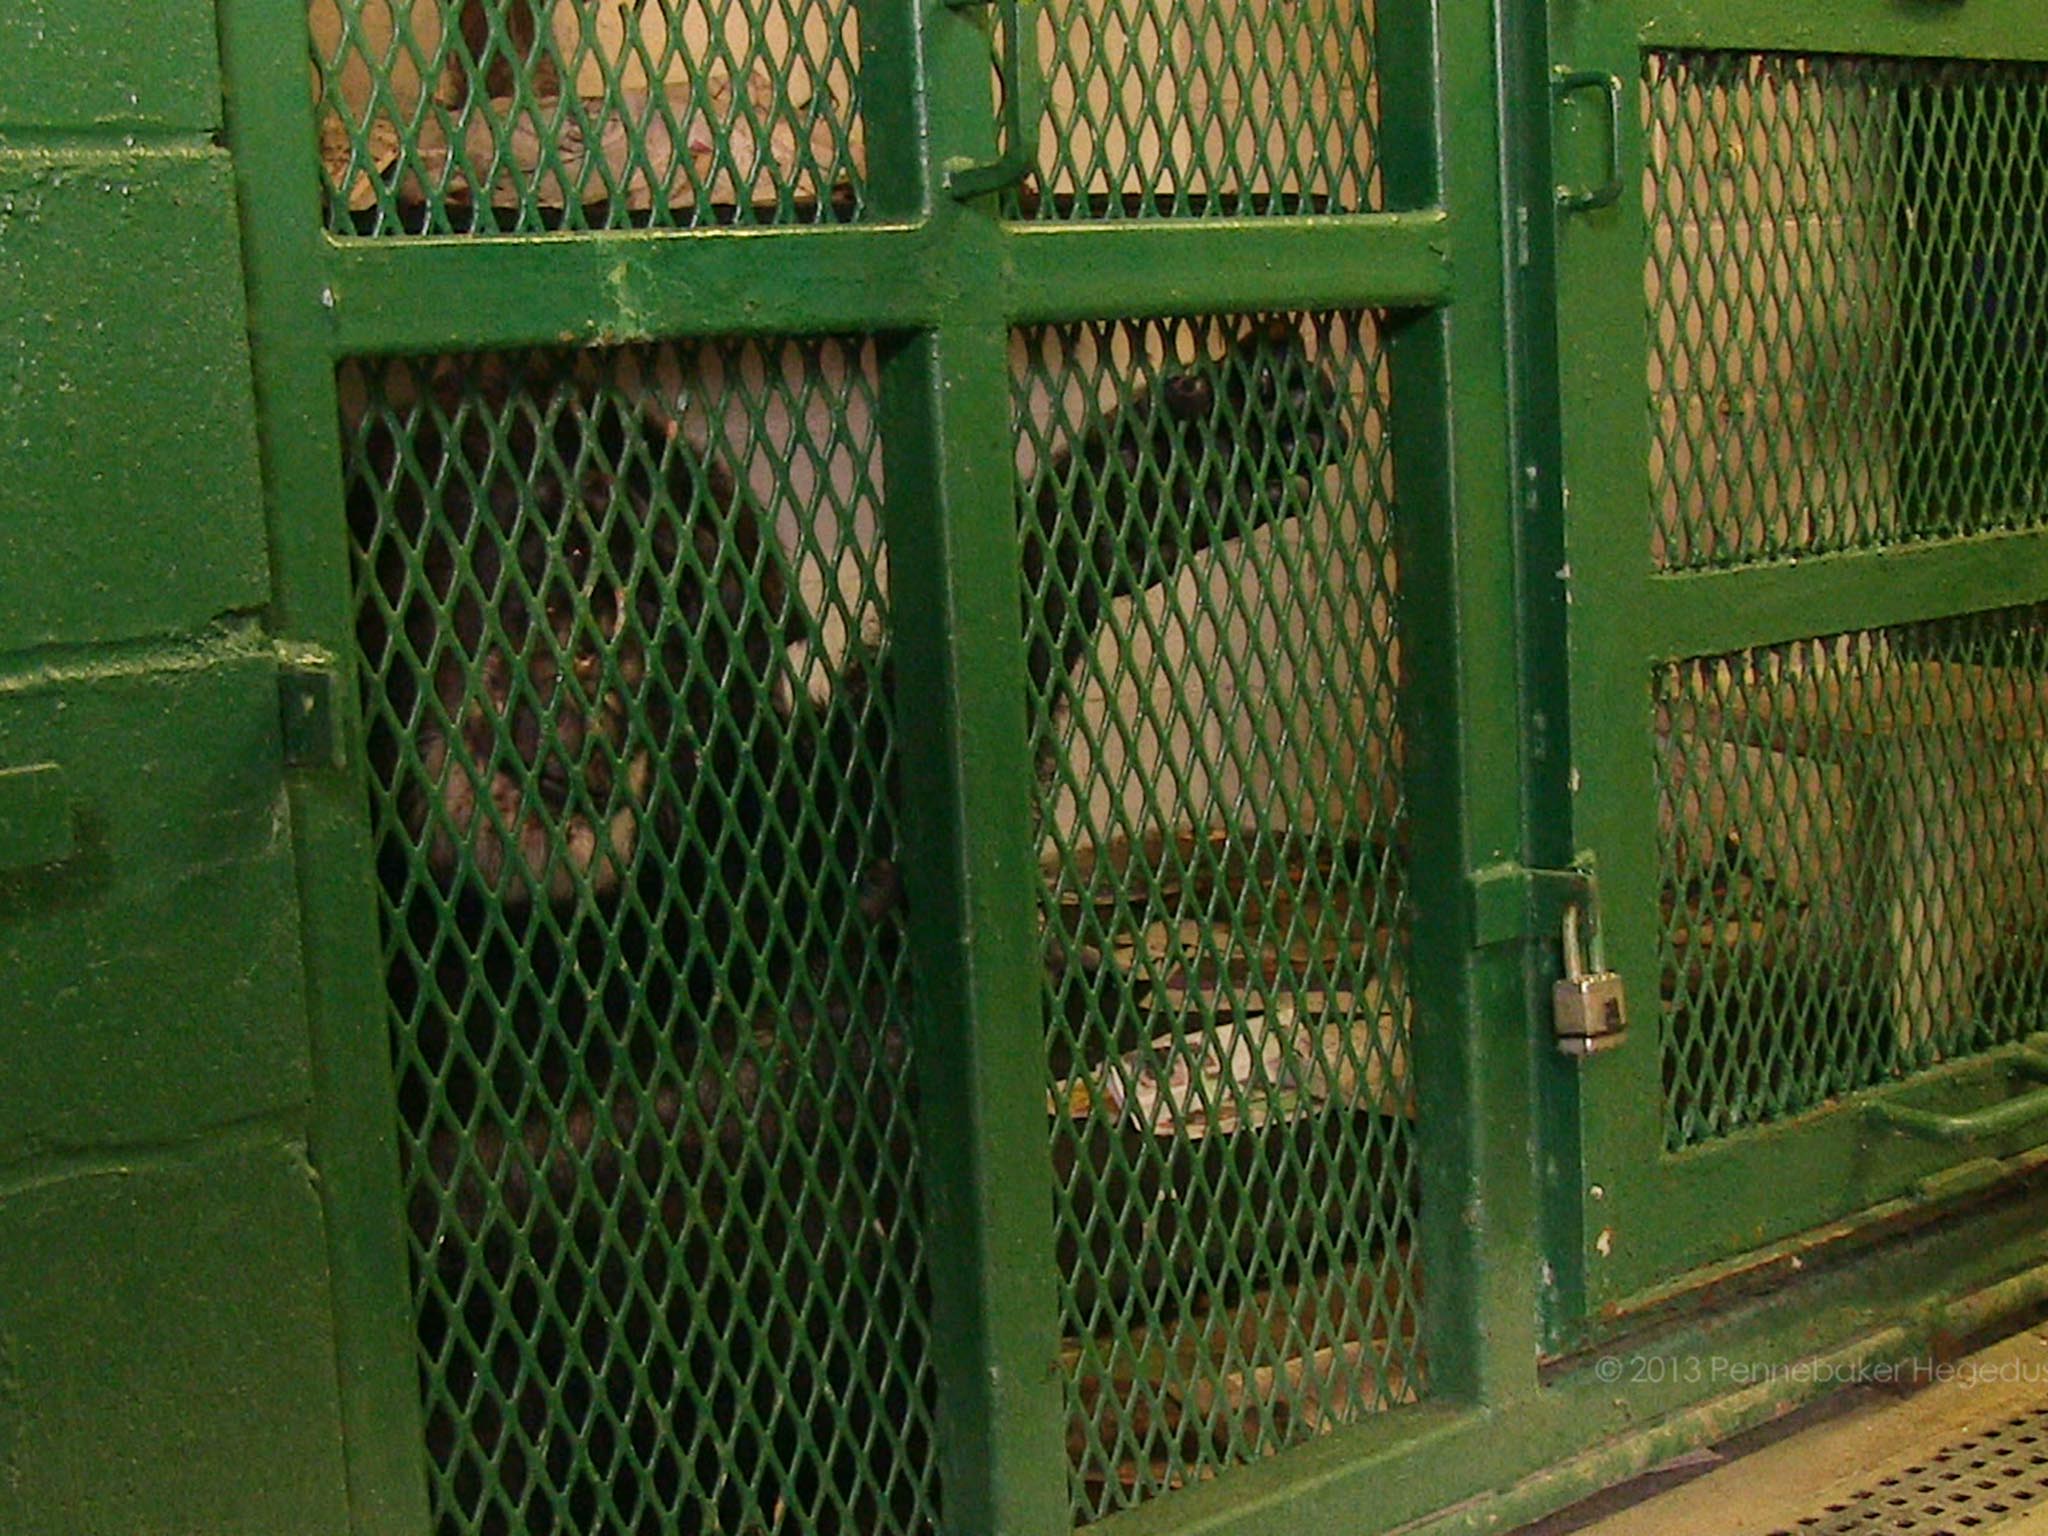 Tommy, as seen in the documentary film ‘Unlocking the Cage’